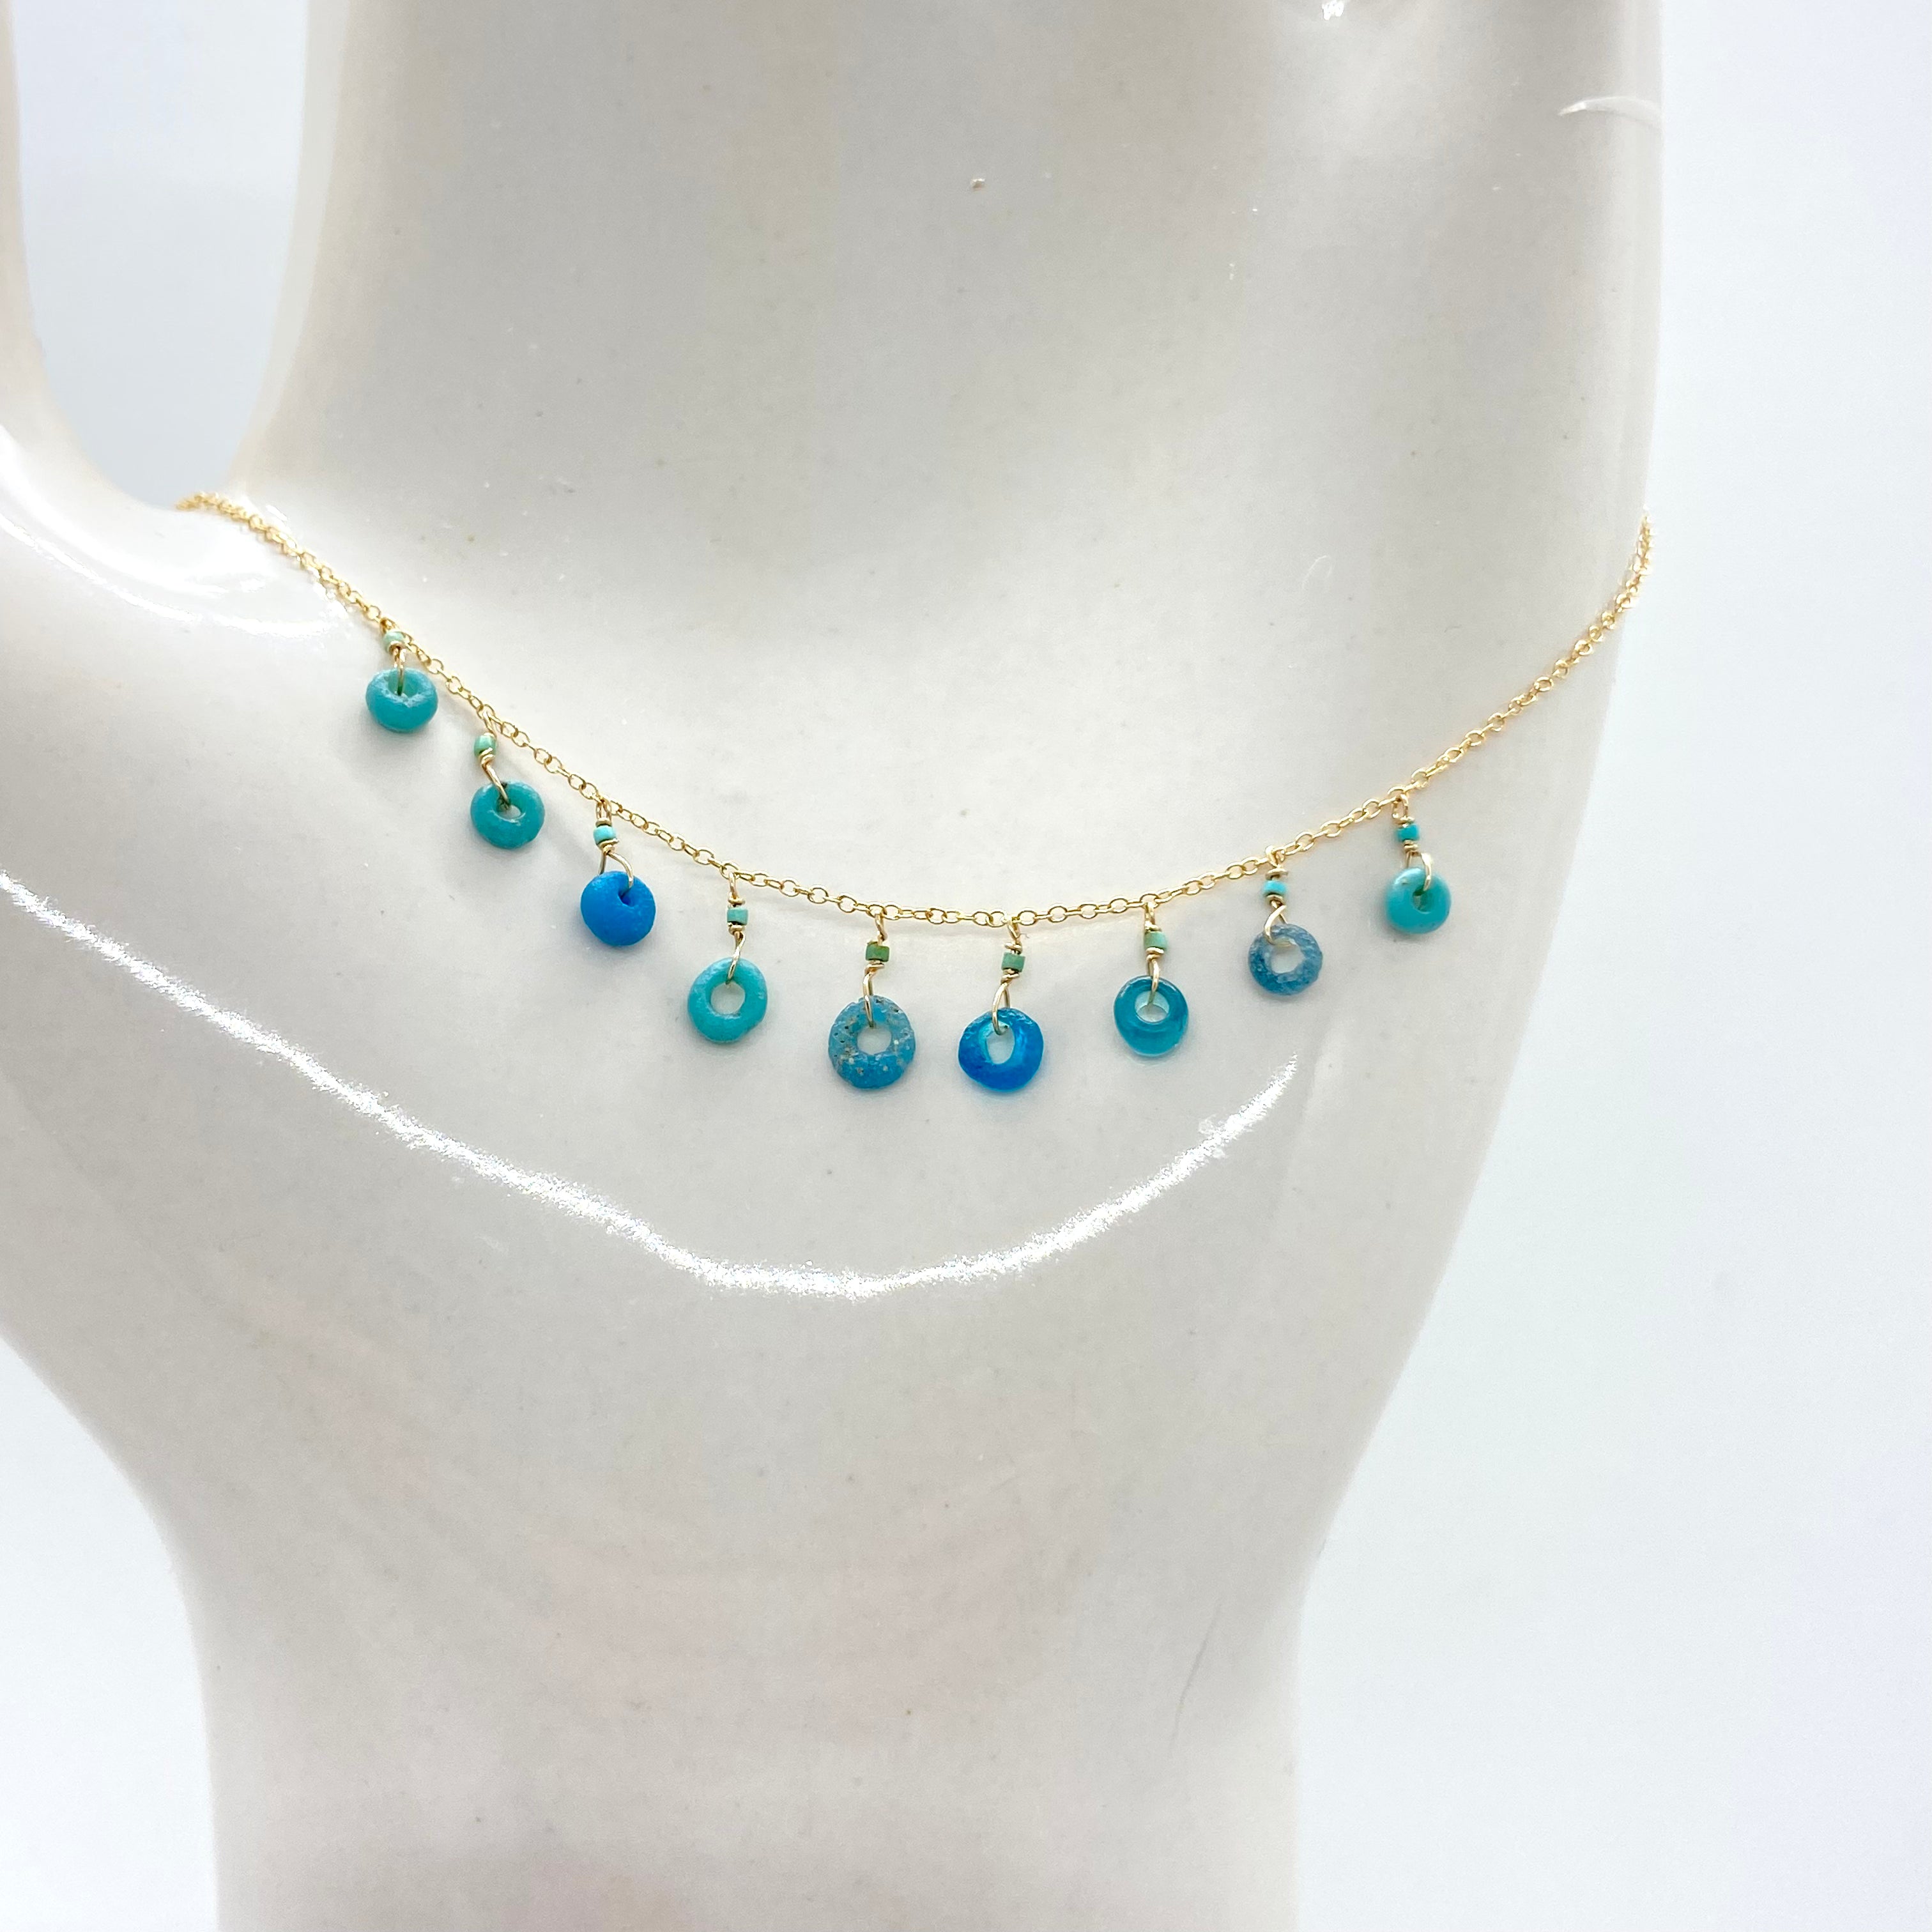 14k Gold Chain Necklace w/ Indo-Pacific Glass Beads